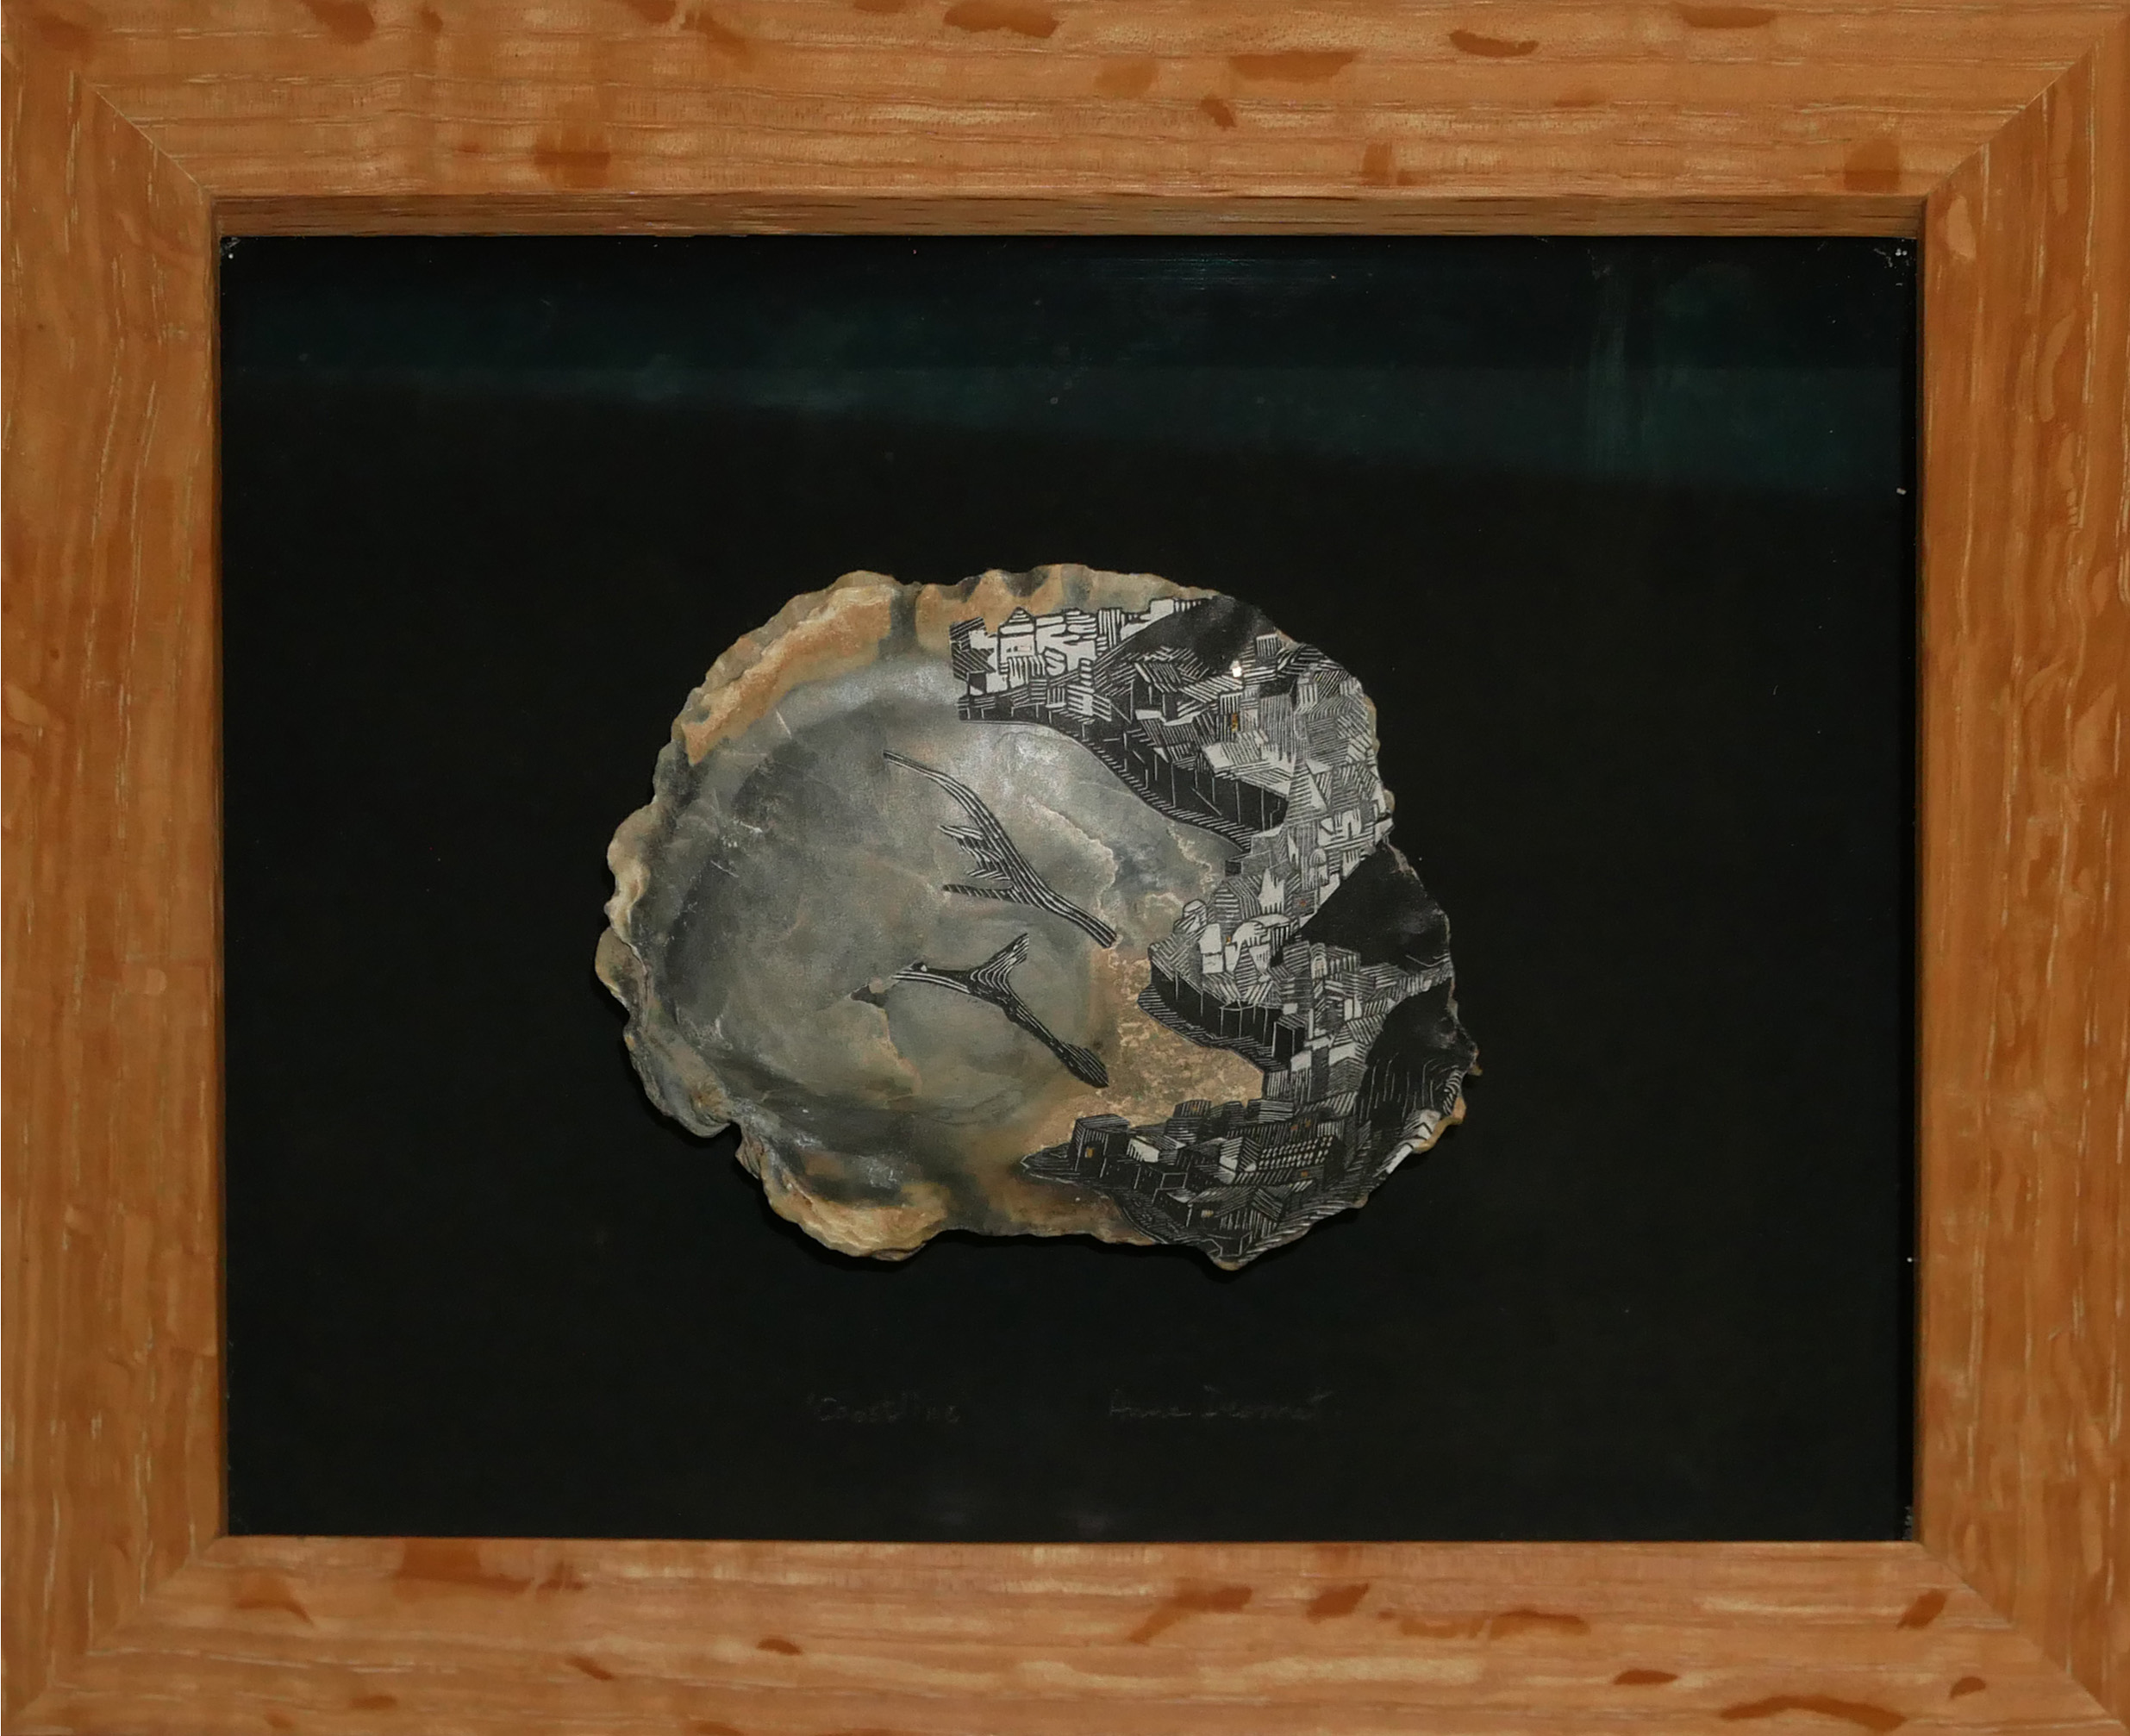 ANNE DESMET, COLLAGE ON SEASHELL Titled ‘Coastline’, 2003, signed below, dated verso, framed and - Image 9 of 9